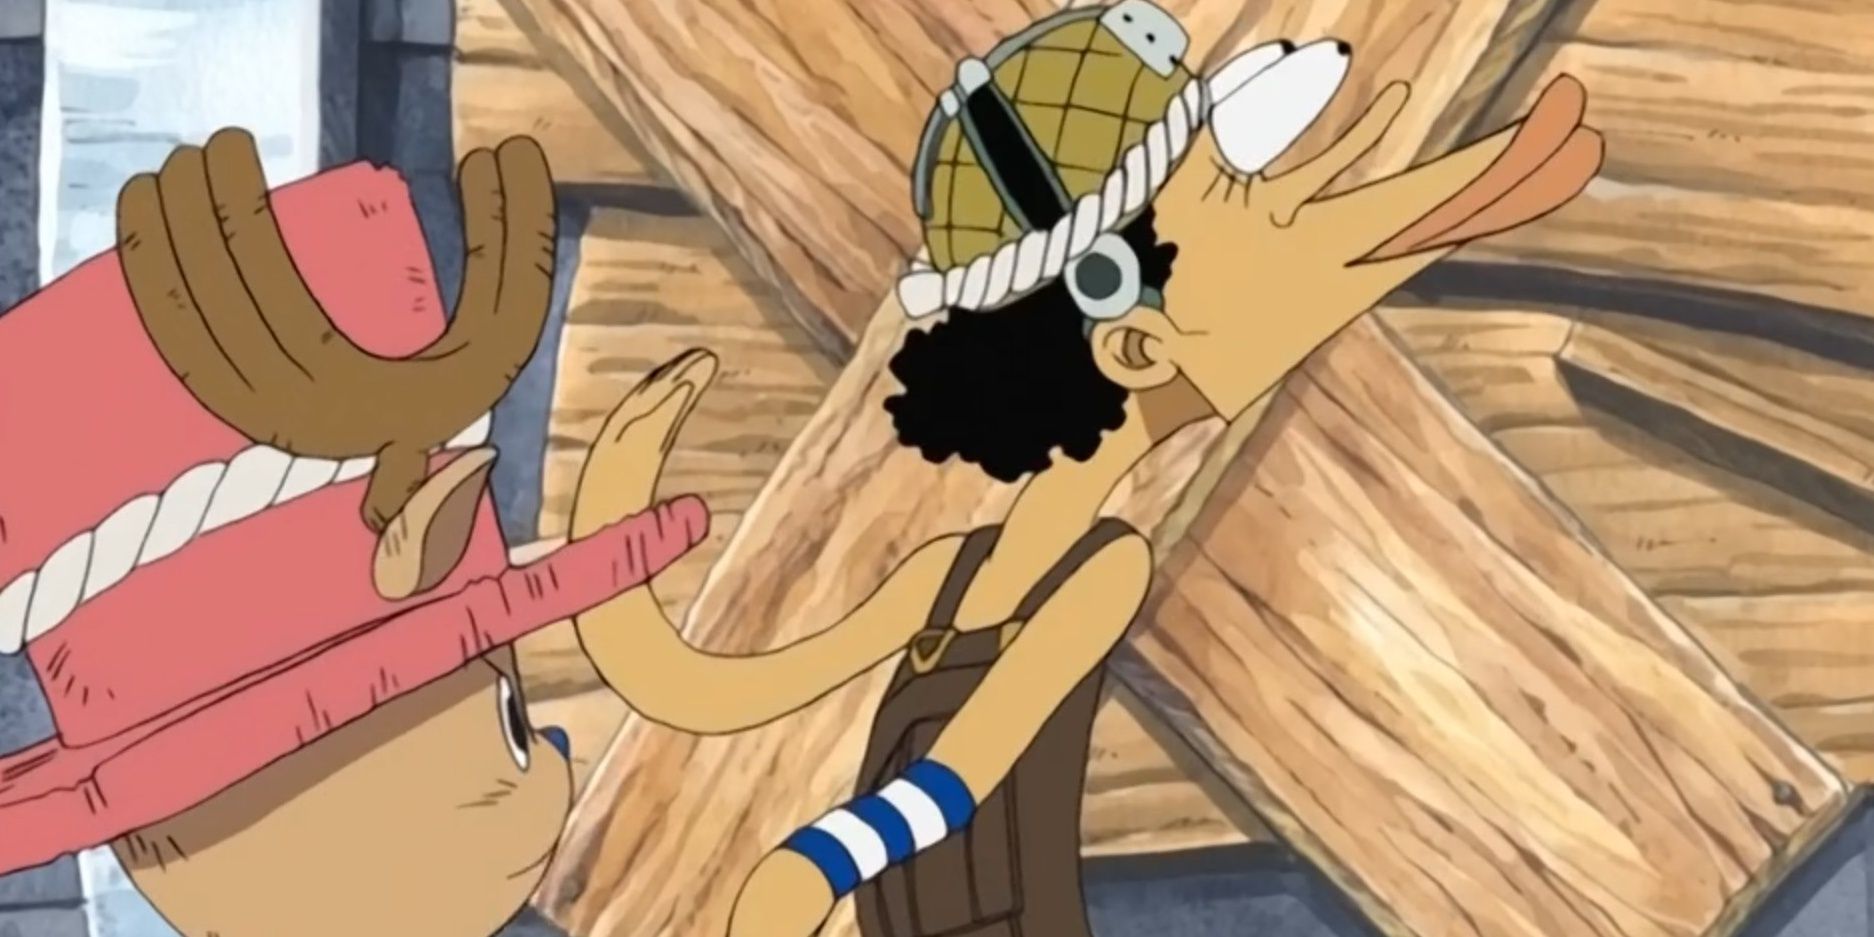 Usopp Shadapp character with another character